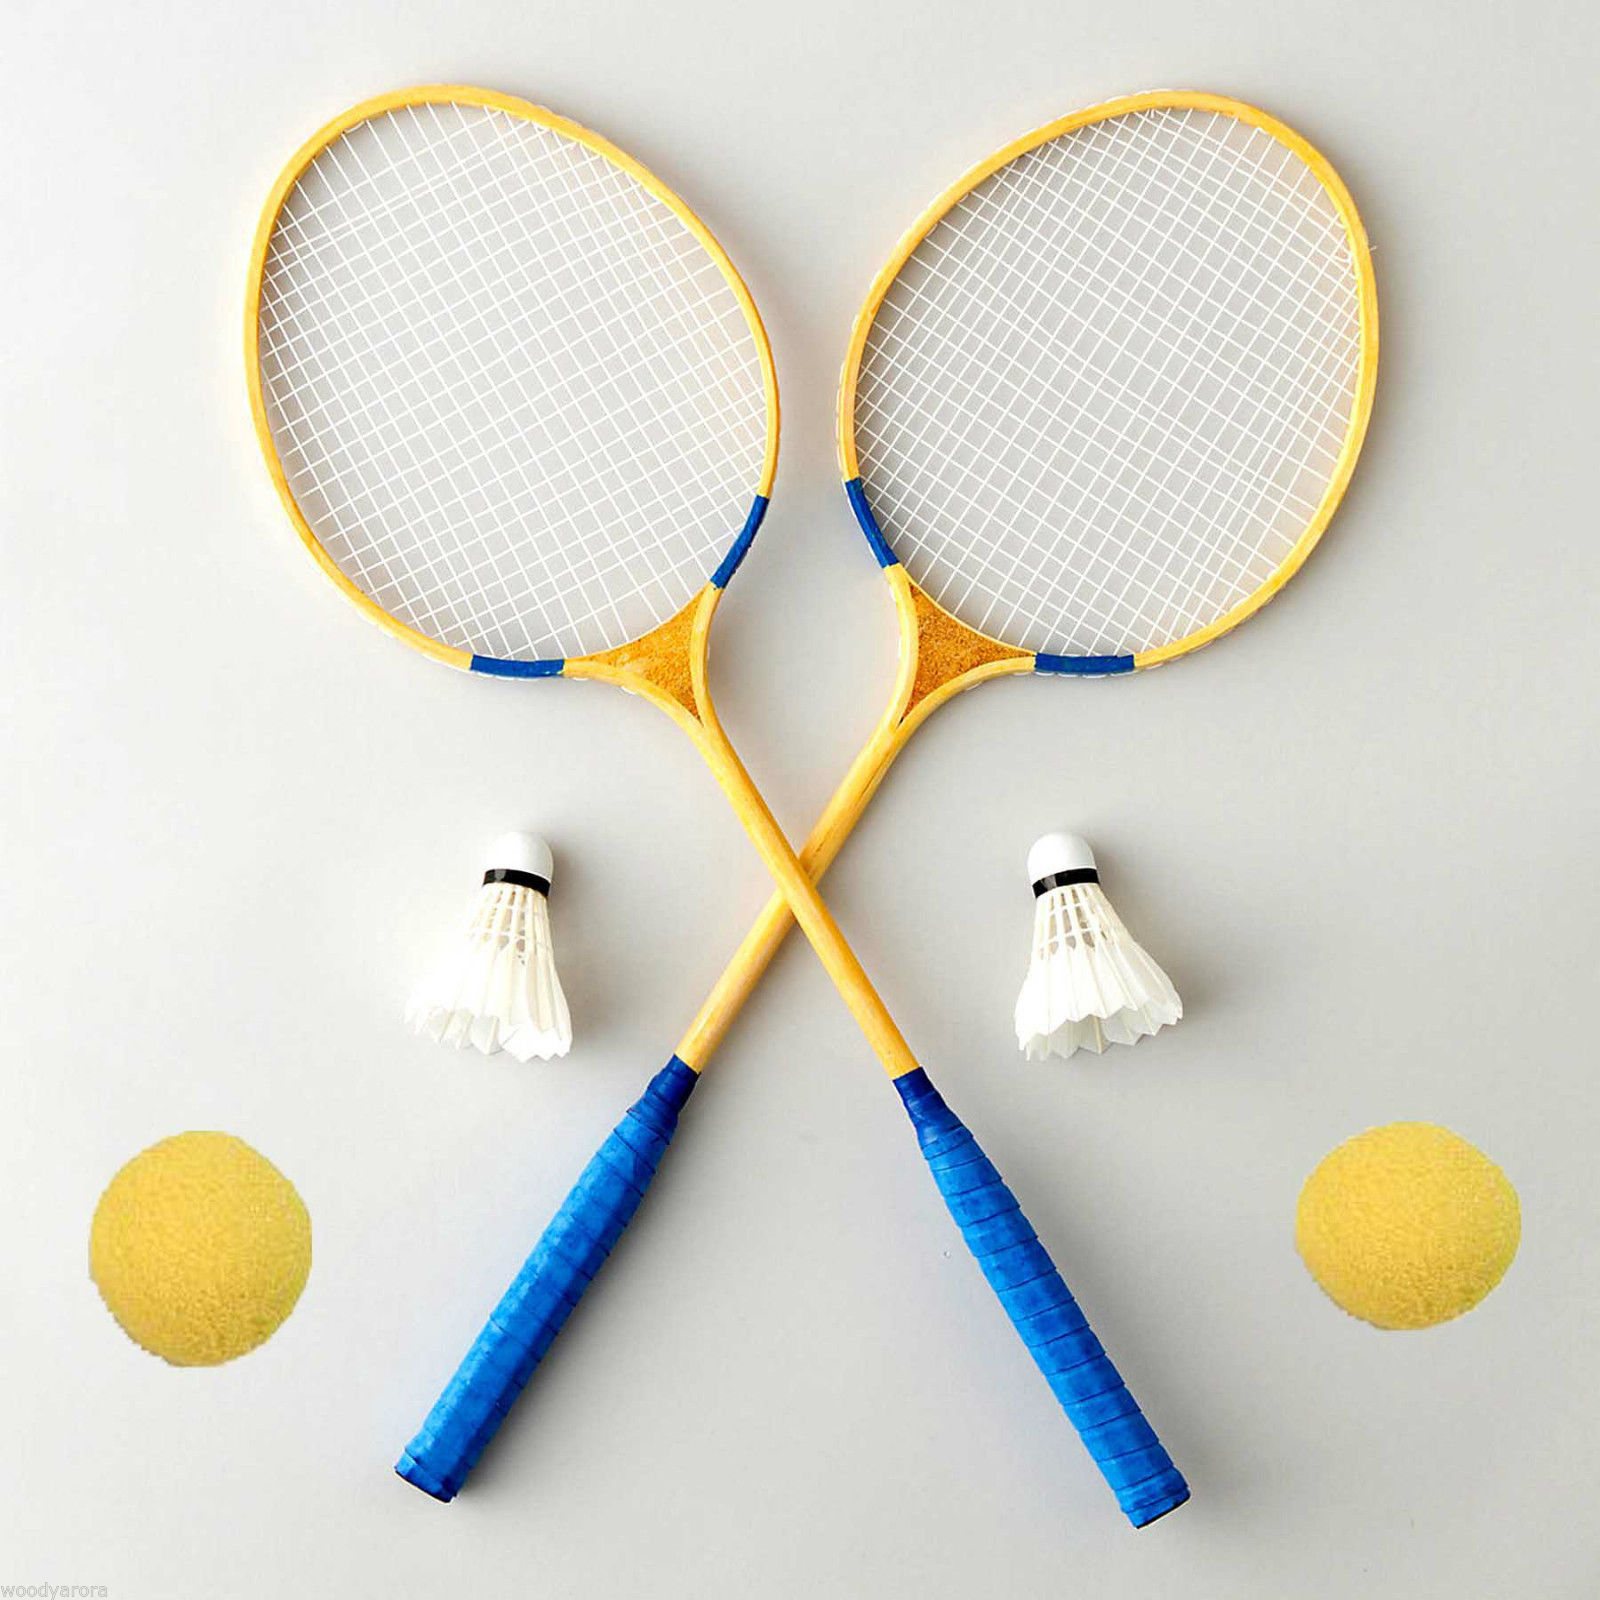 Buy Export Quality Wooden Badminton And Ball Badminton Rackets Pair By